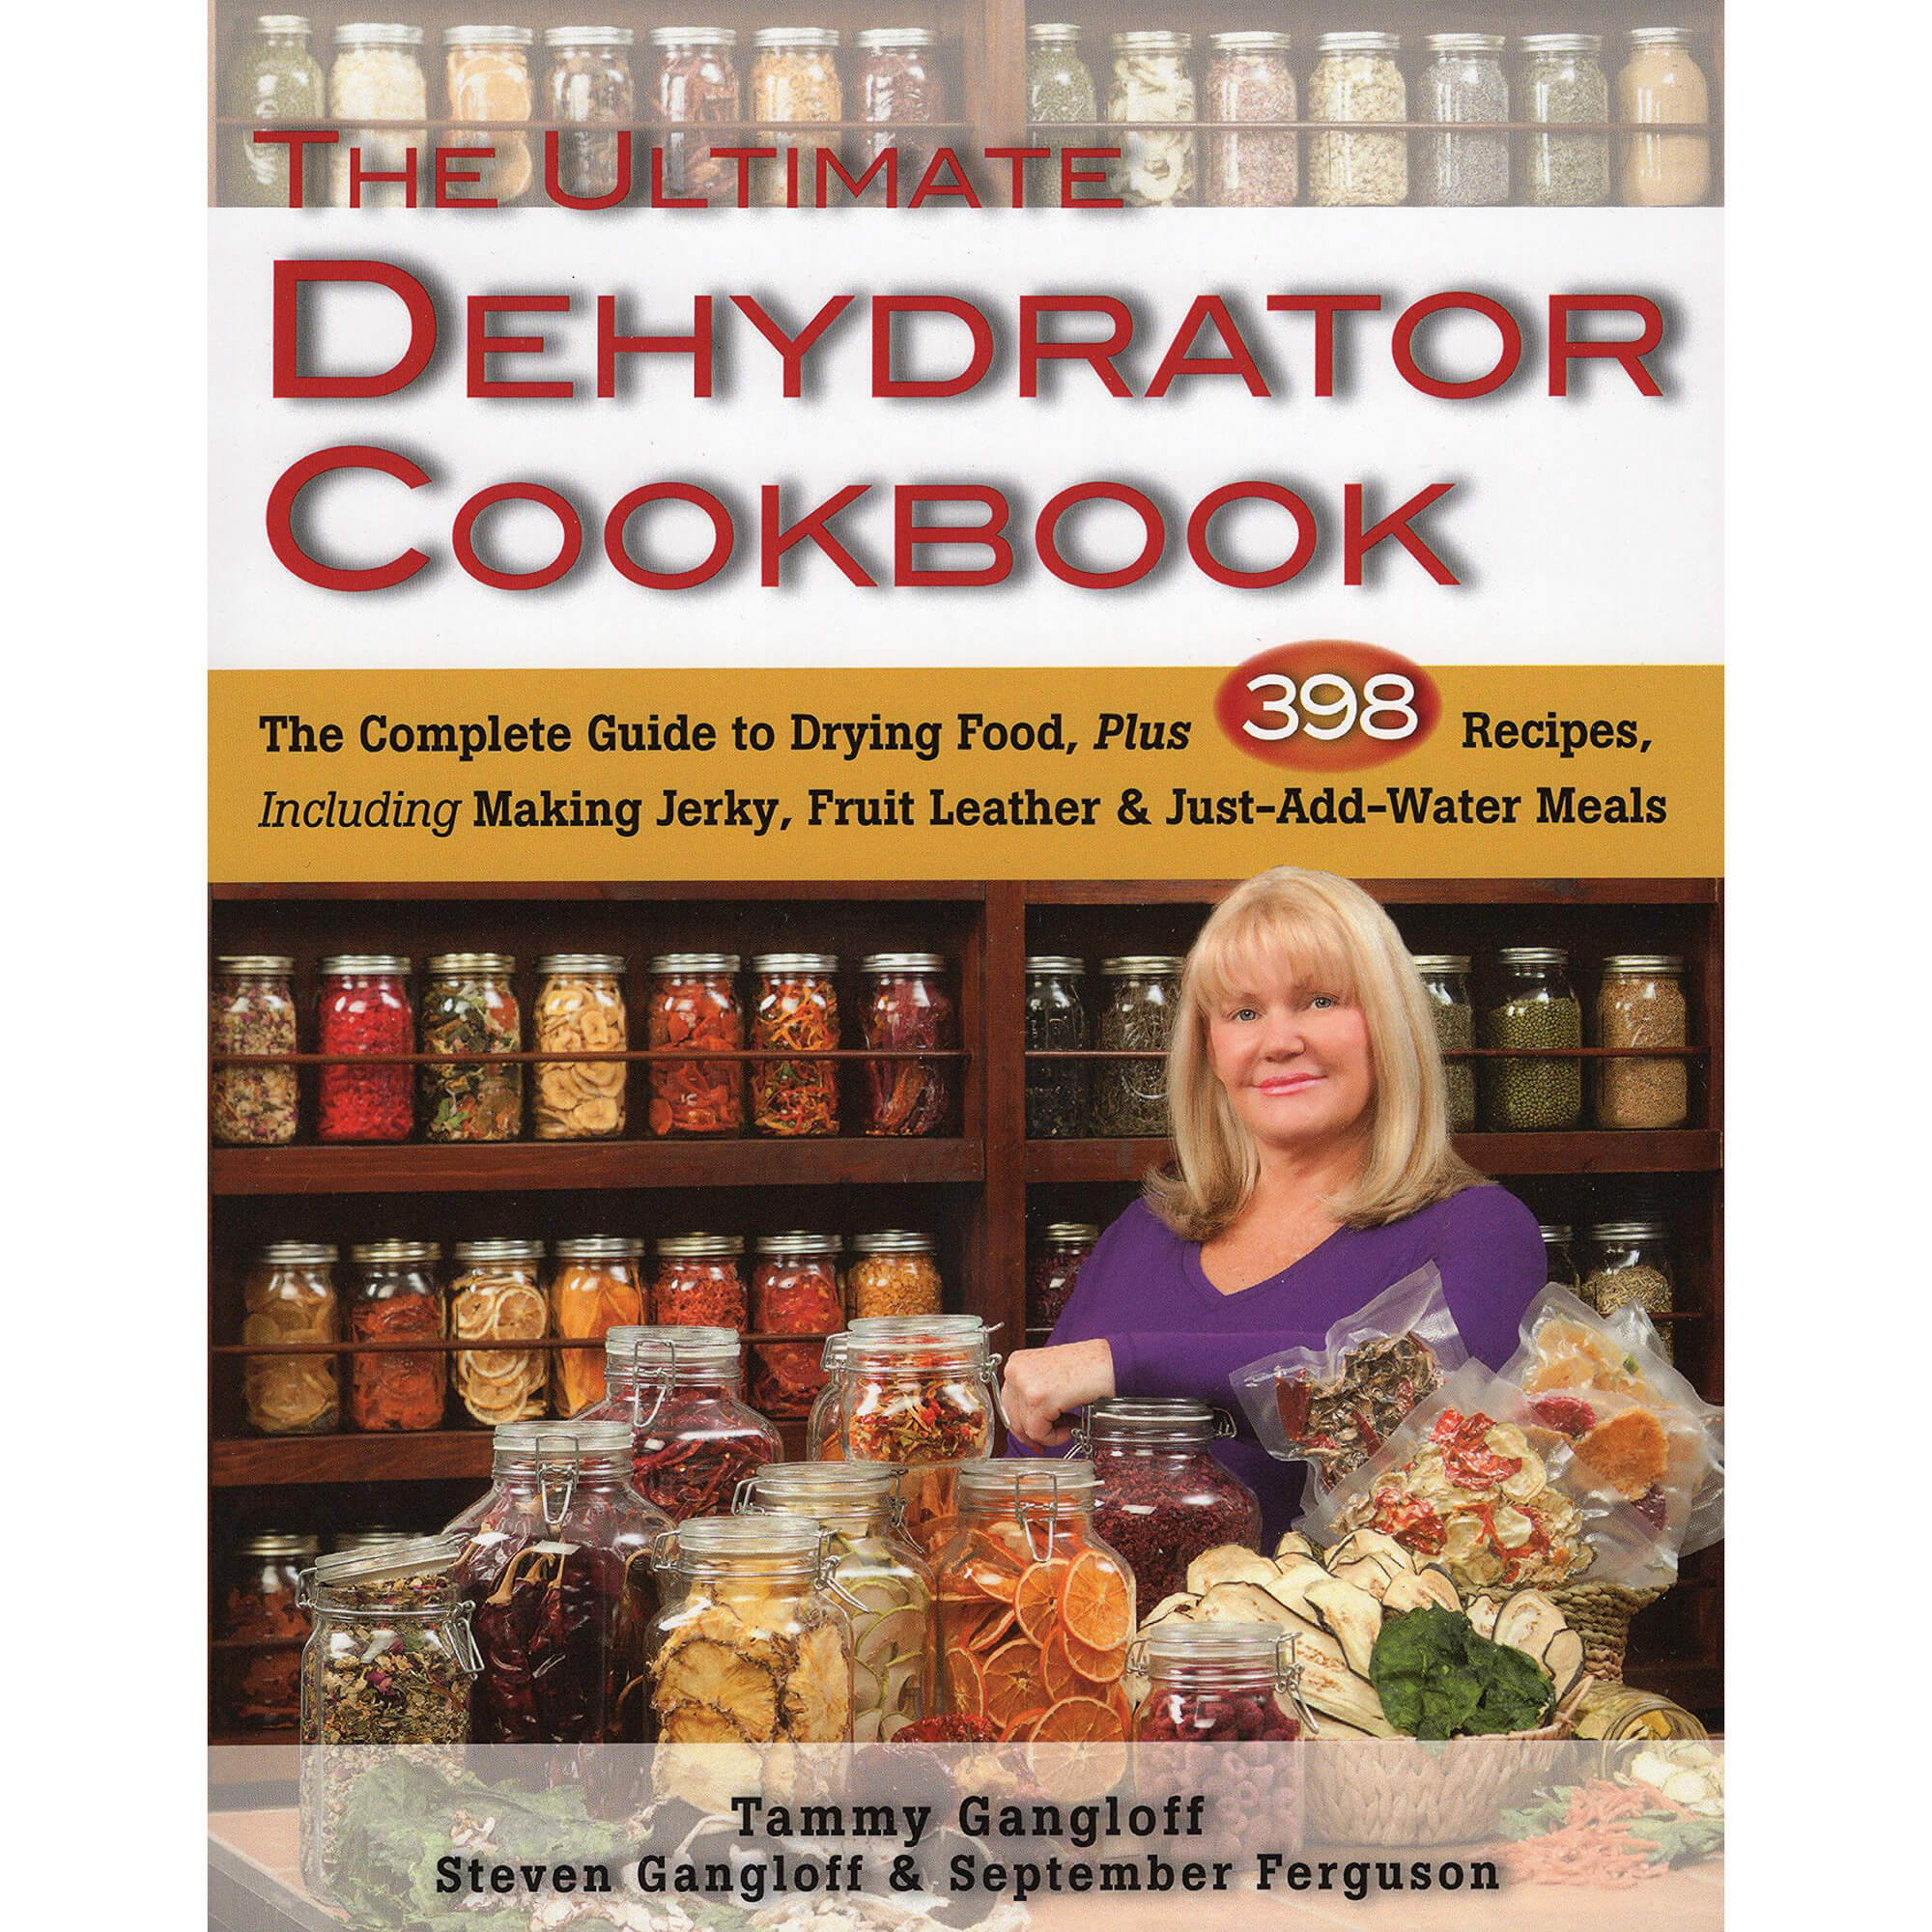 The Ultimate Dehydrator Cookbook front cover.